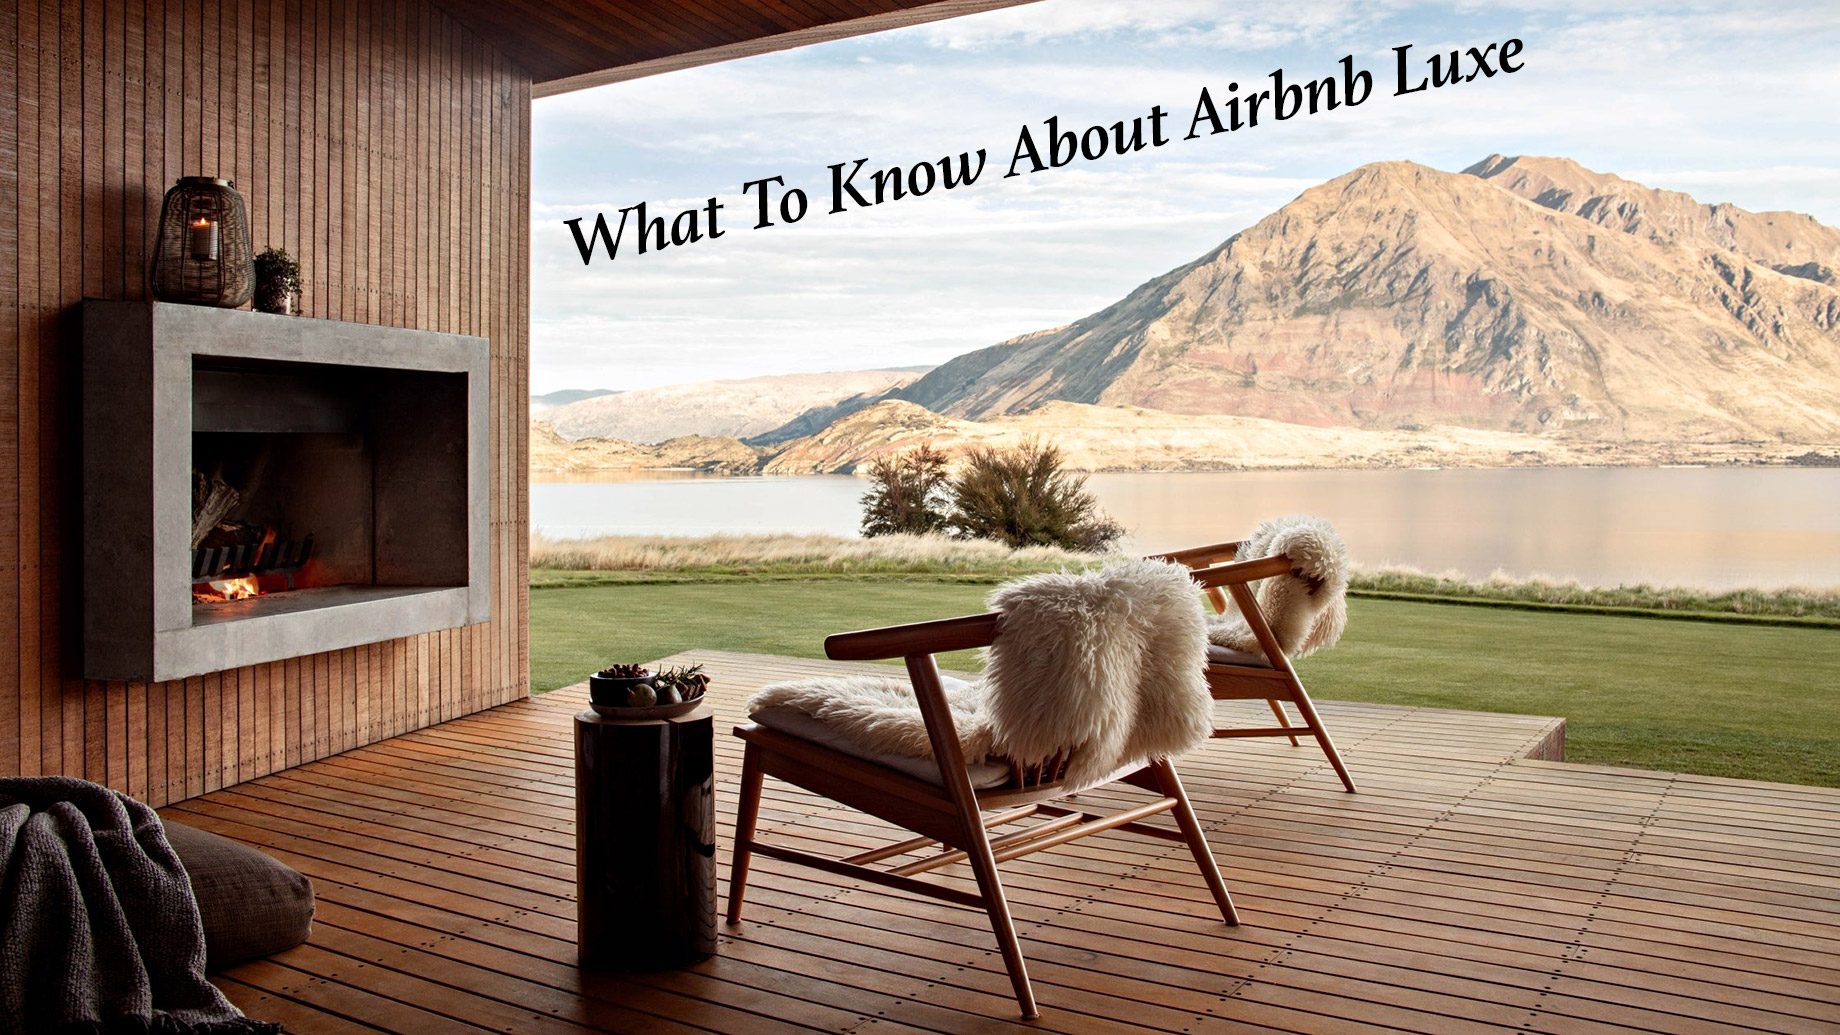 What To Know About Airbnb Luxe